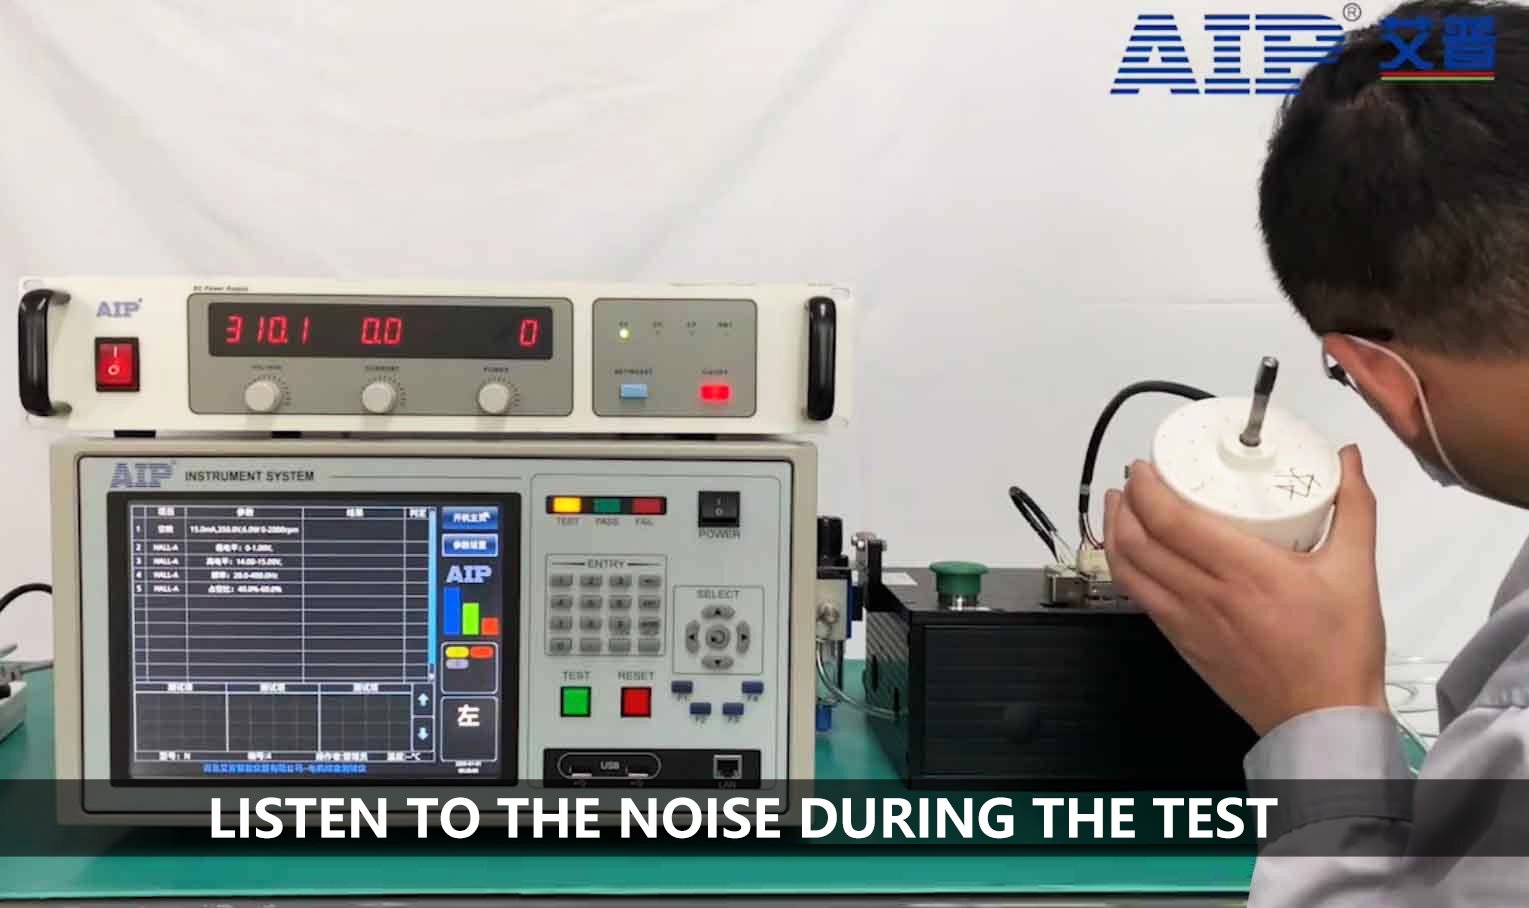 Listen to the noise during the test